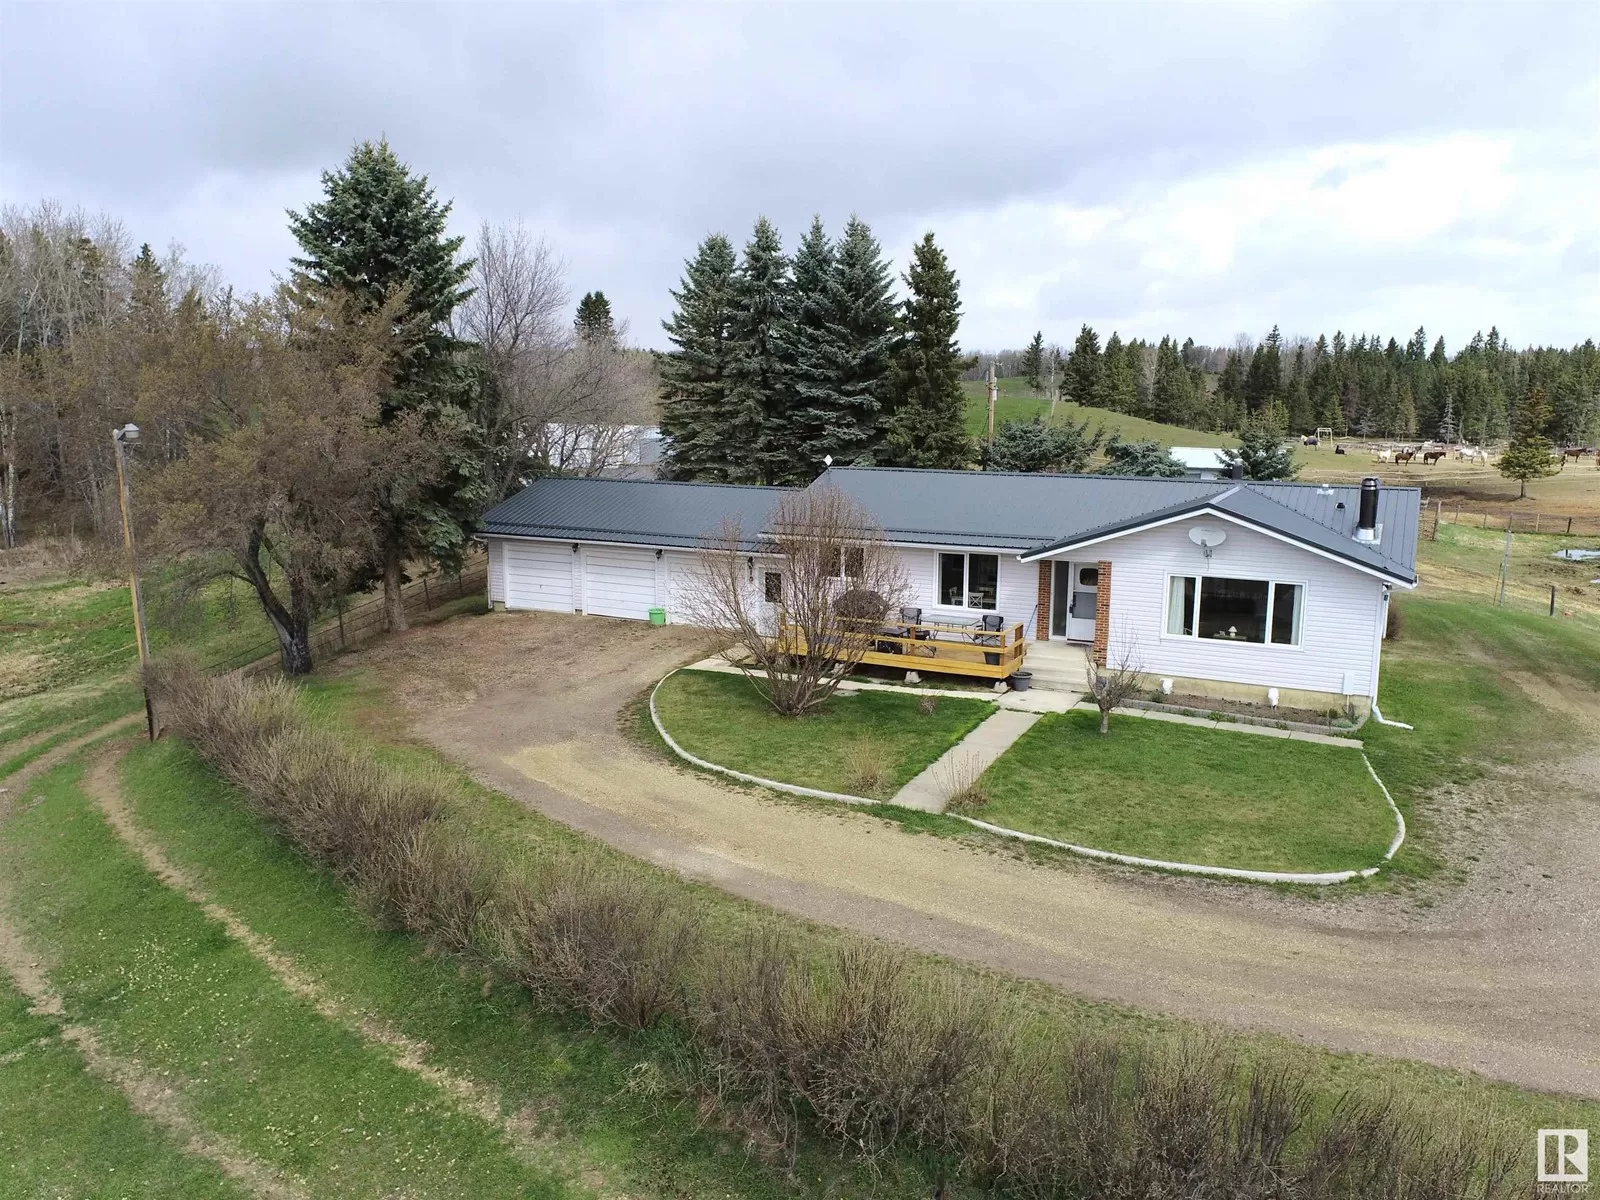 House for rent: 53104 Rge Rd 12, Rural Parkland County, Alberta T7Y 2T1